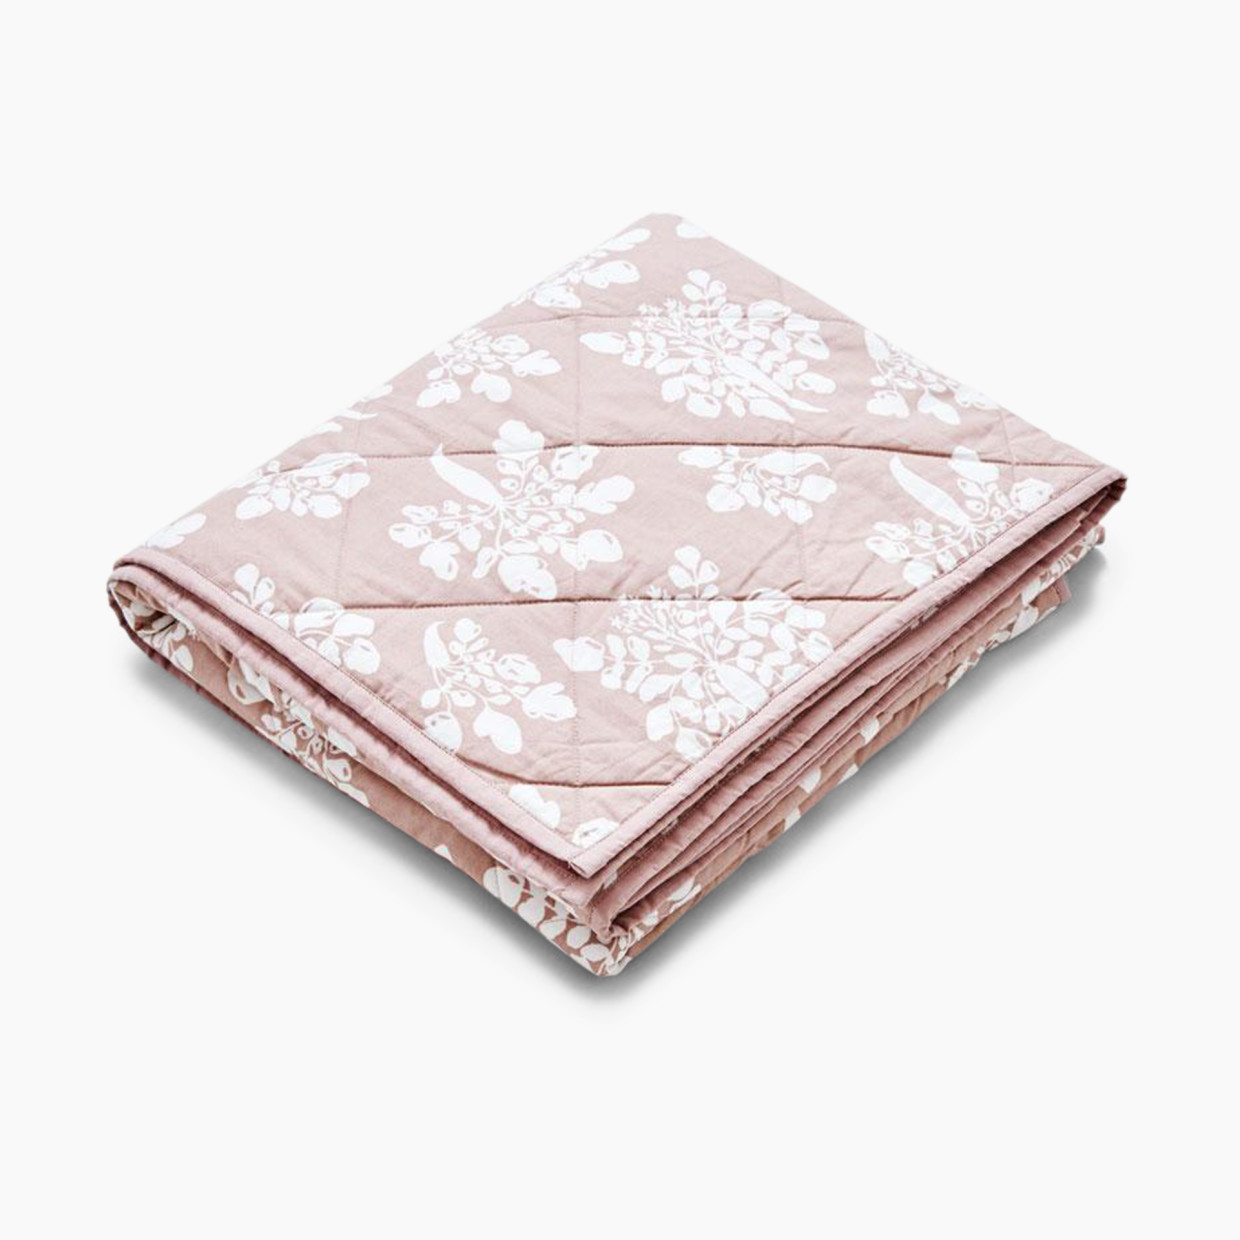 Lewis Quilted Baby Blanket - Inverse Parsnip Mauve.